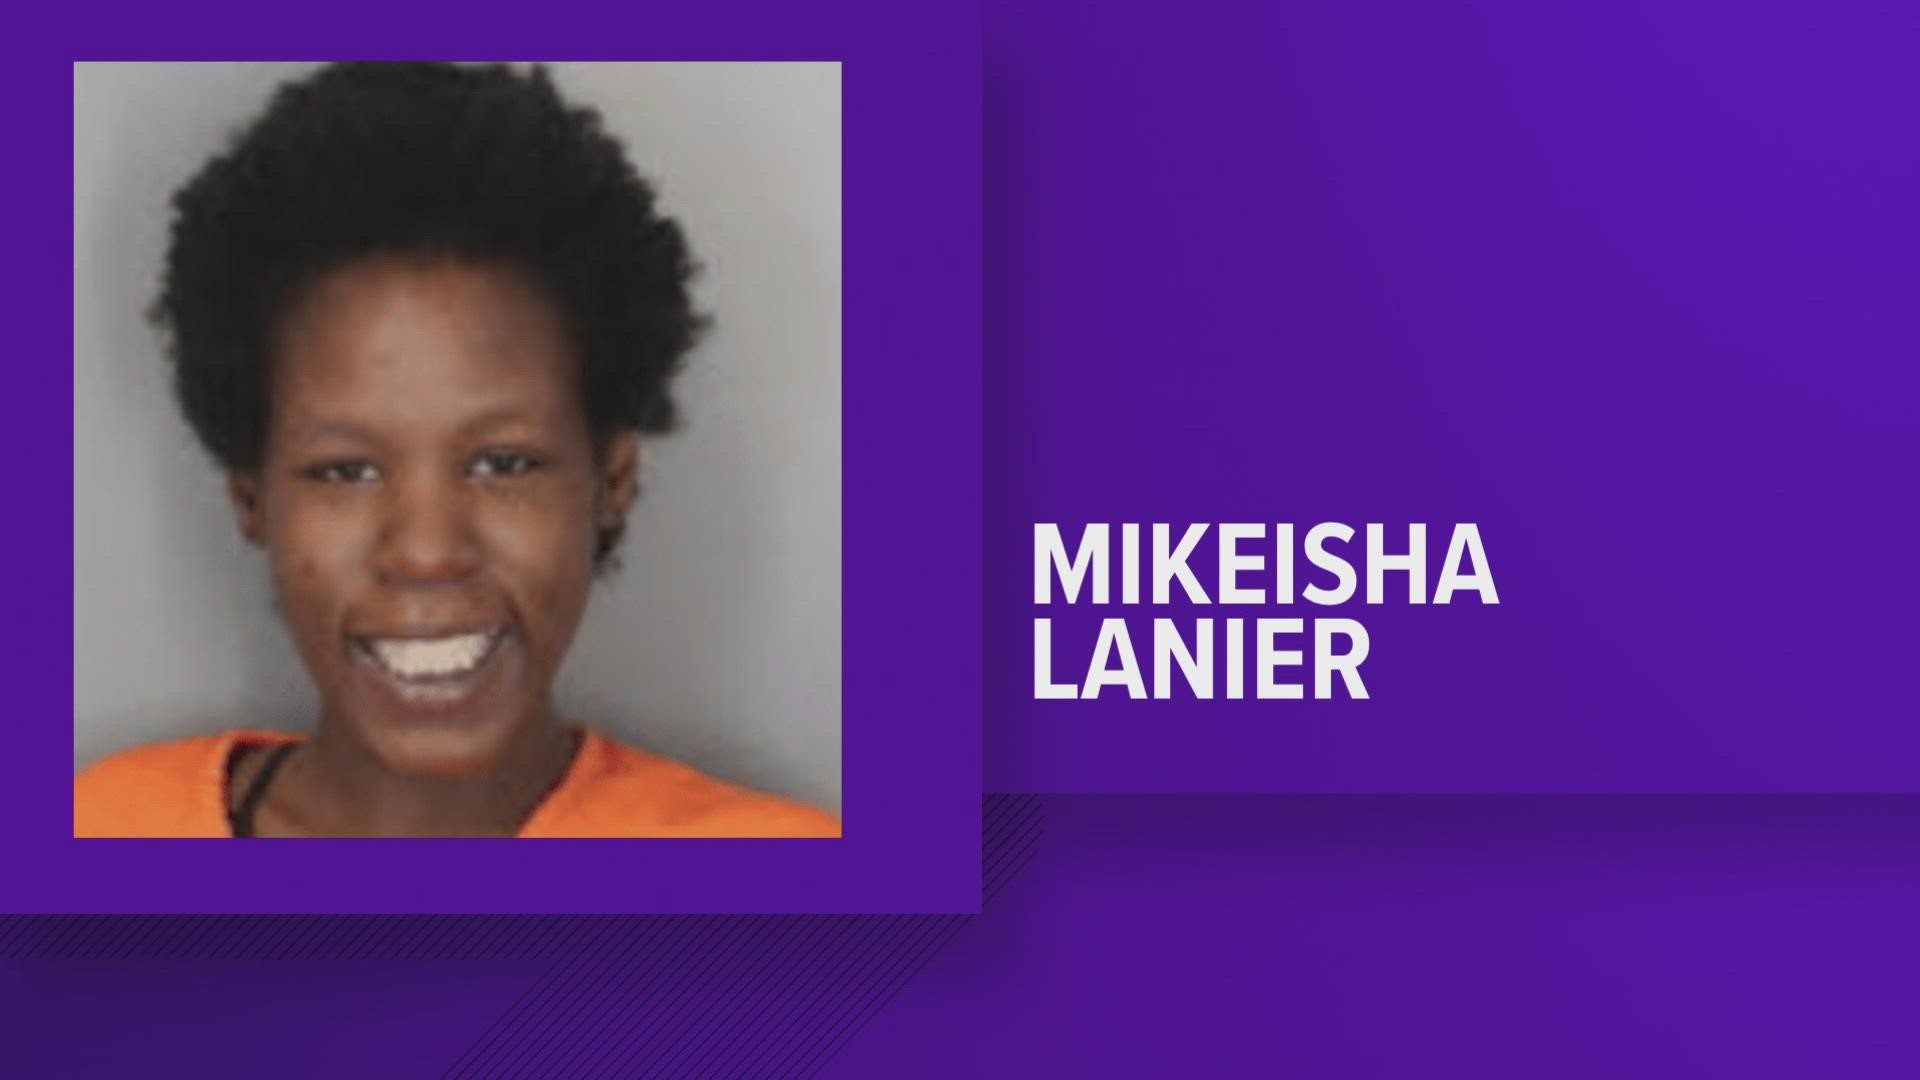 Police said a witness heard Mikeisha Lanier say, “Let me go before I shoot this place up" while picking up her child at Sheffield Elementary School.